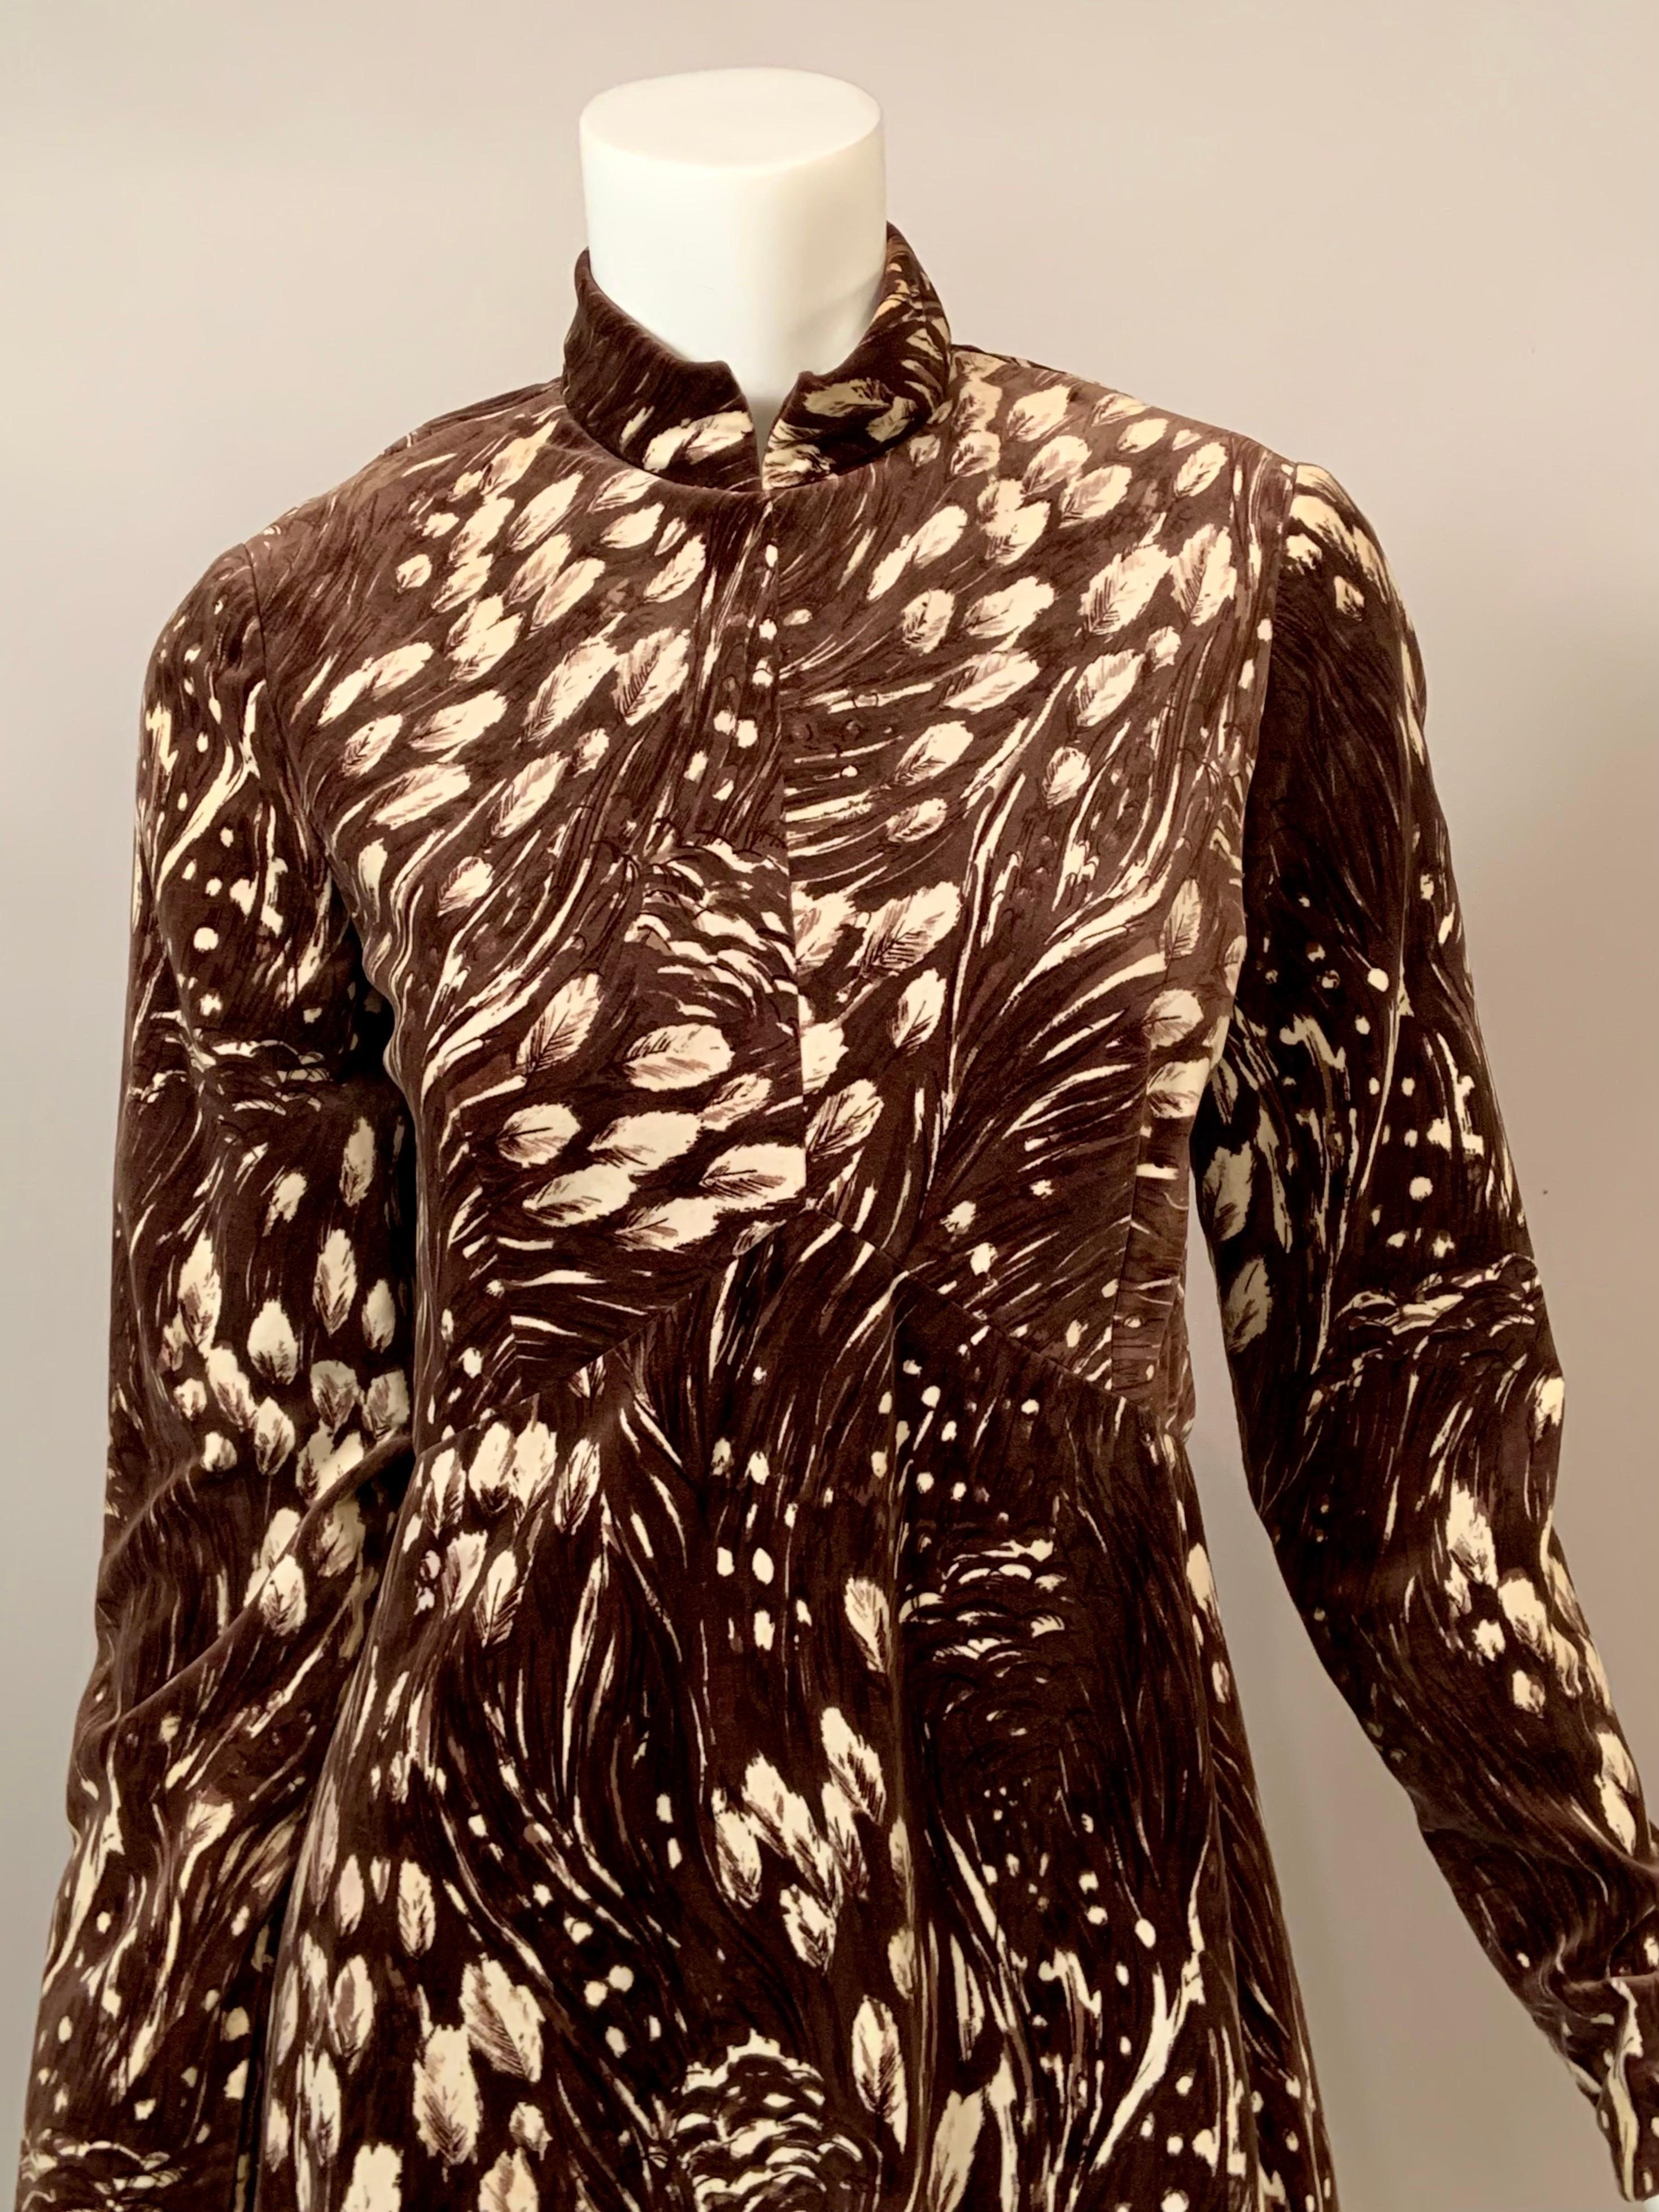 New York Designer George Halley used a lovely cotton velvet with an ombré mocha colored background and a creamy beige feather print for this 1970's evening dress.
The dress has a high collar, a waistline which rises to a point at the center front